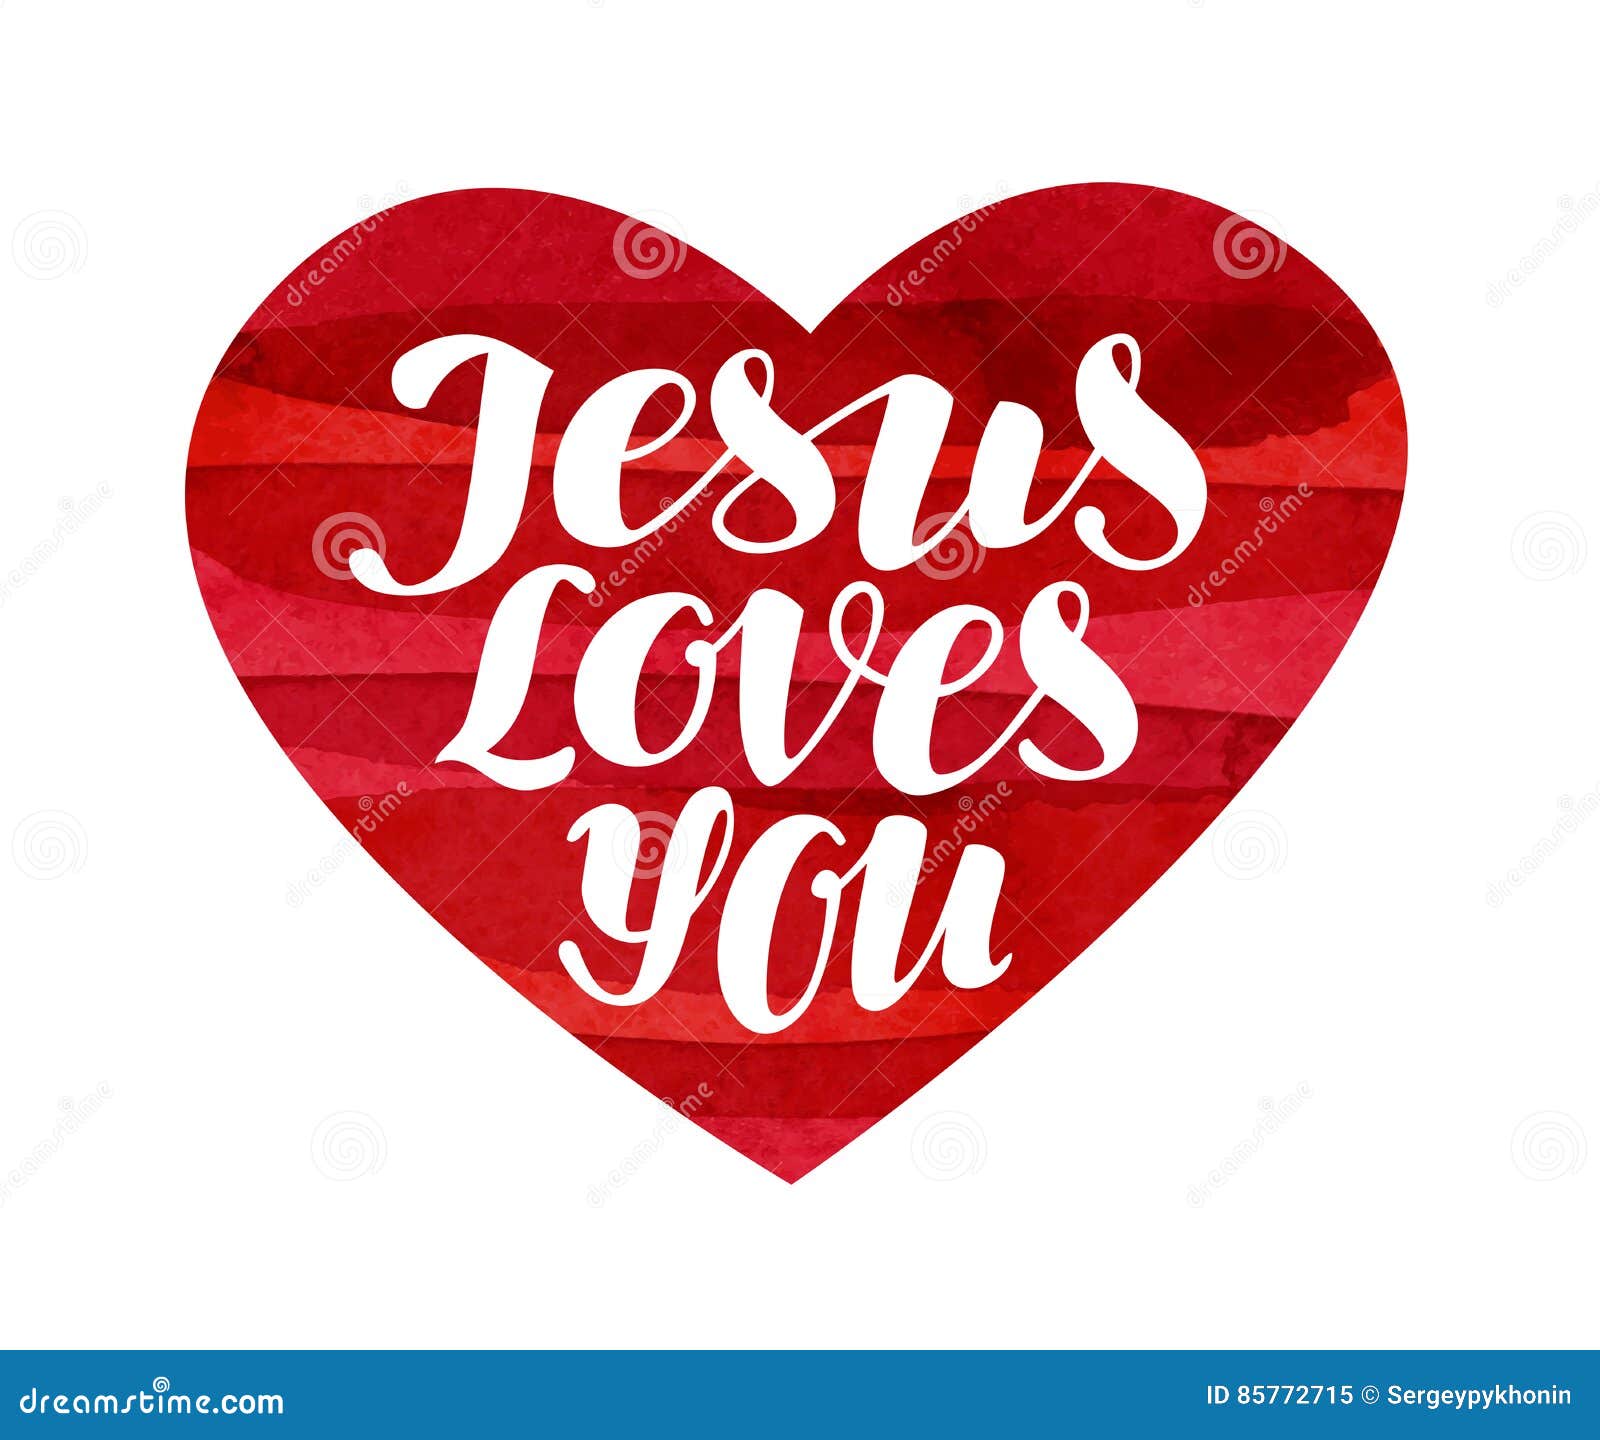 Jesus Loves You Lettering calligraphy in shape heart Vector illustration Royalty Free Stock